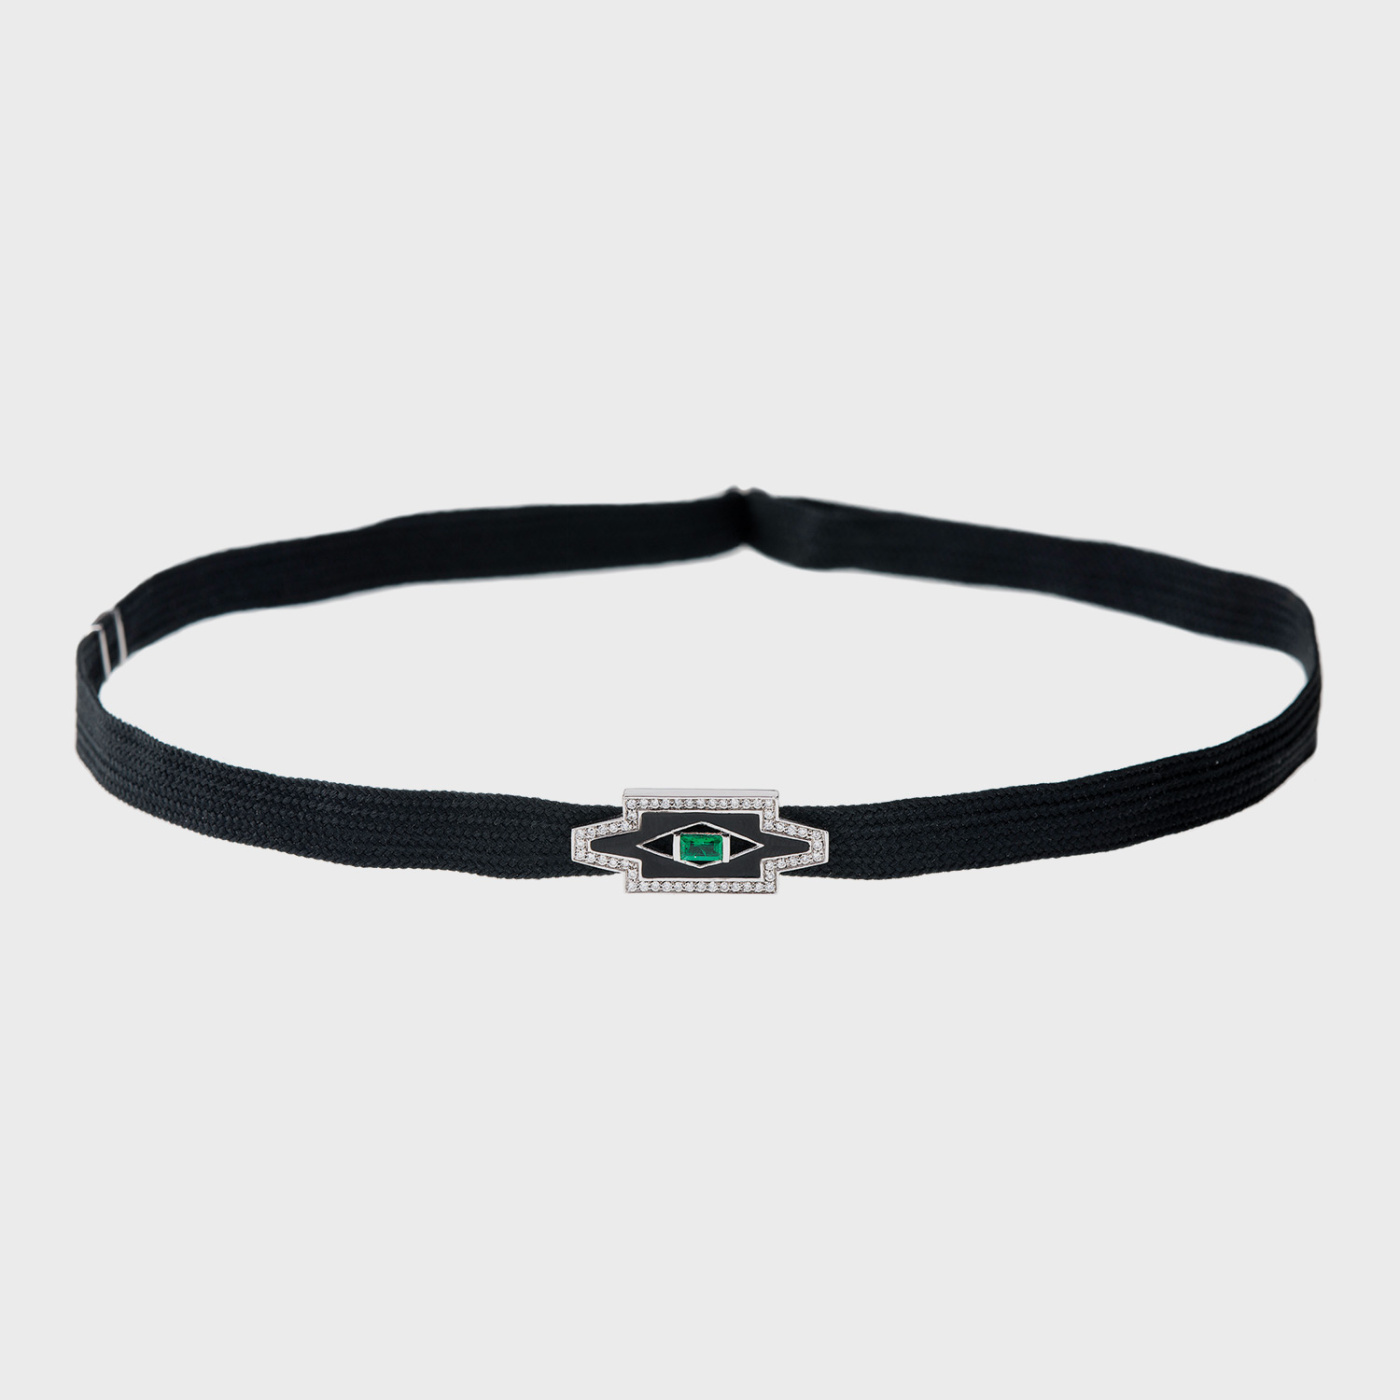 White gold choker necklace with white diamonds, emerald and black enamel